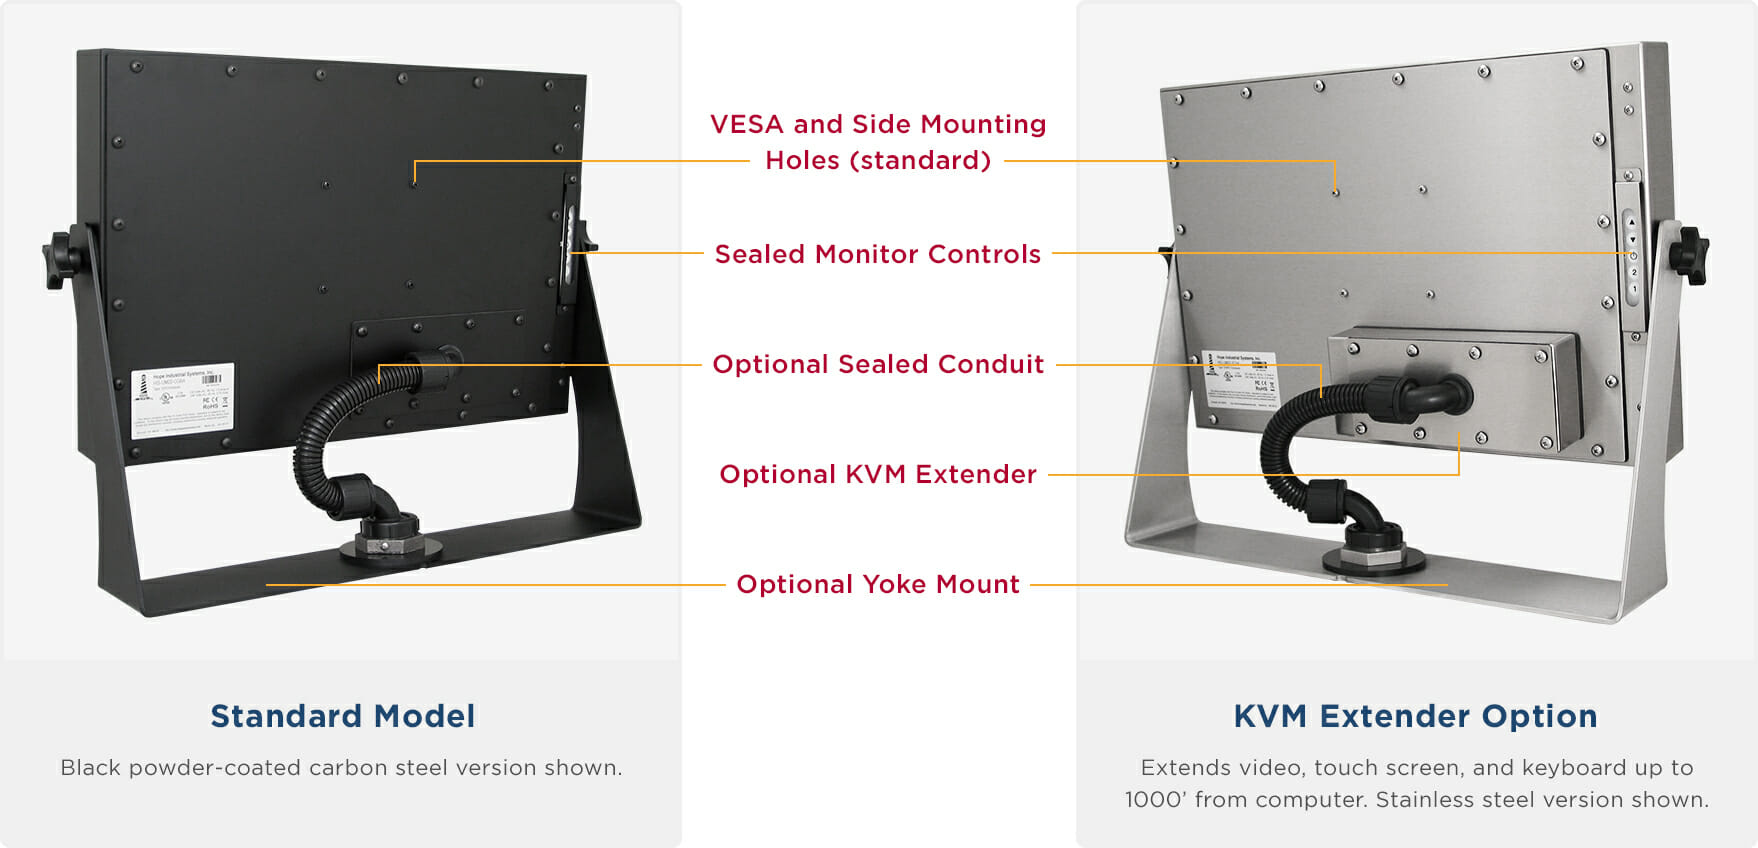 Rear views of NEMA 4/4X Rated Widescreen 22" Universal Mount Monitors showing Industrial Enclosure features and options